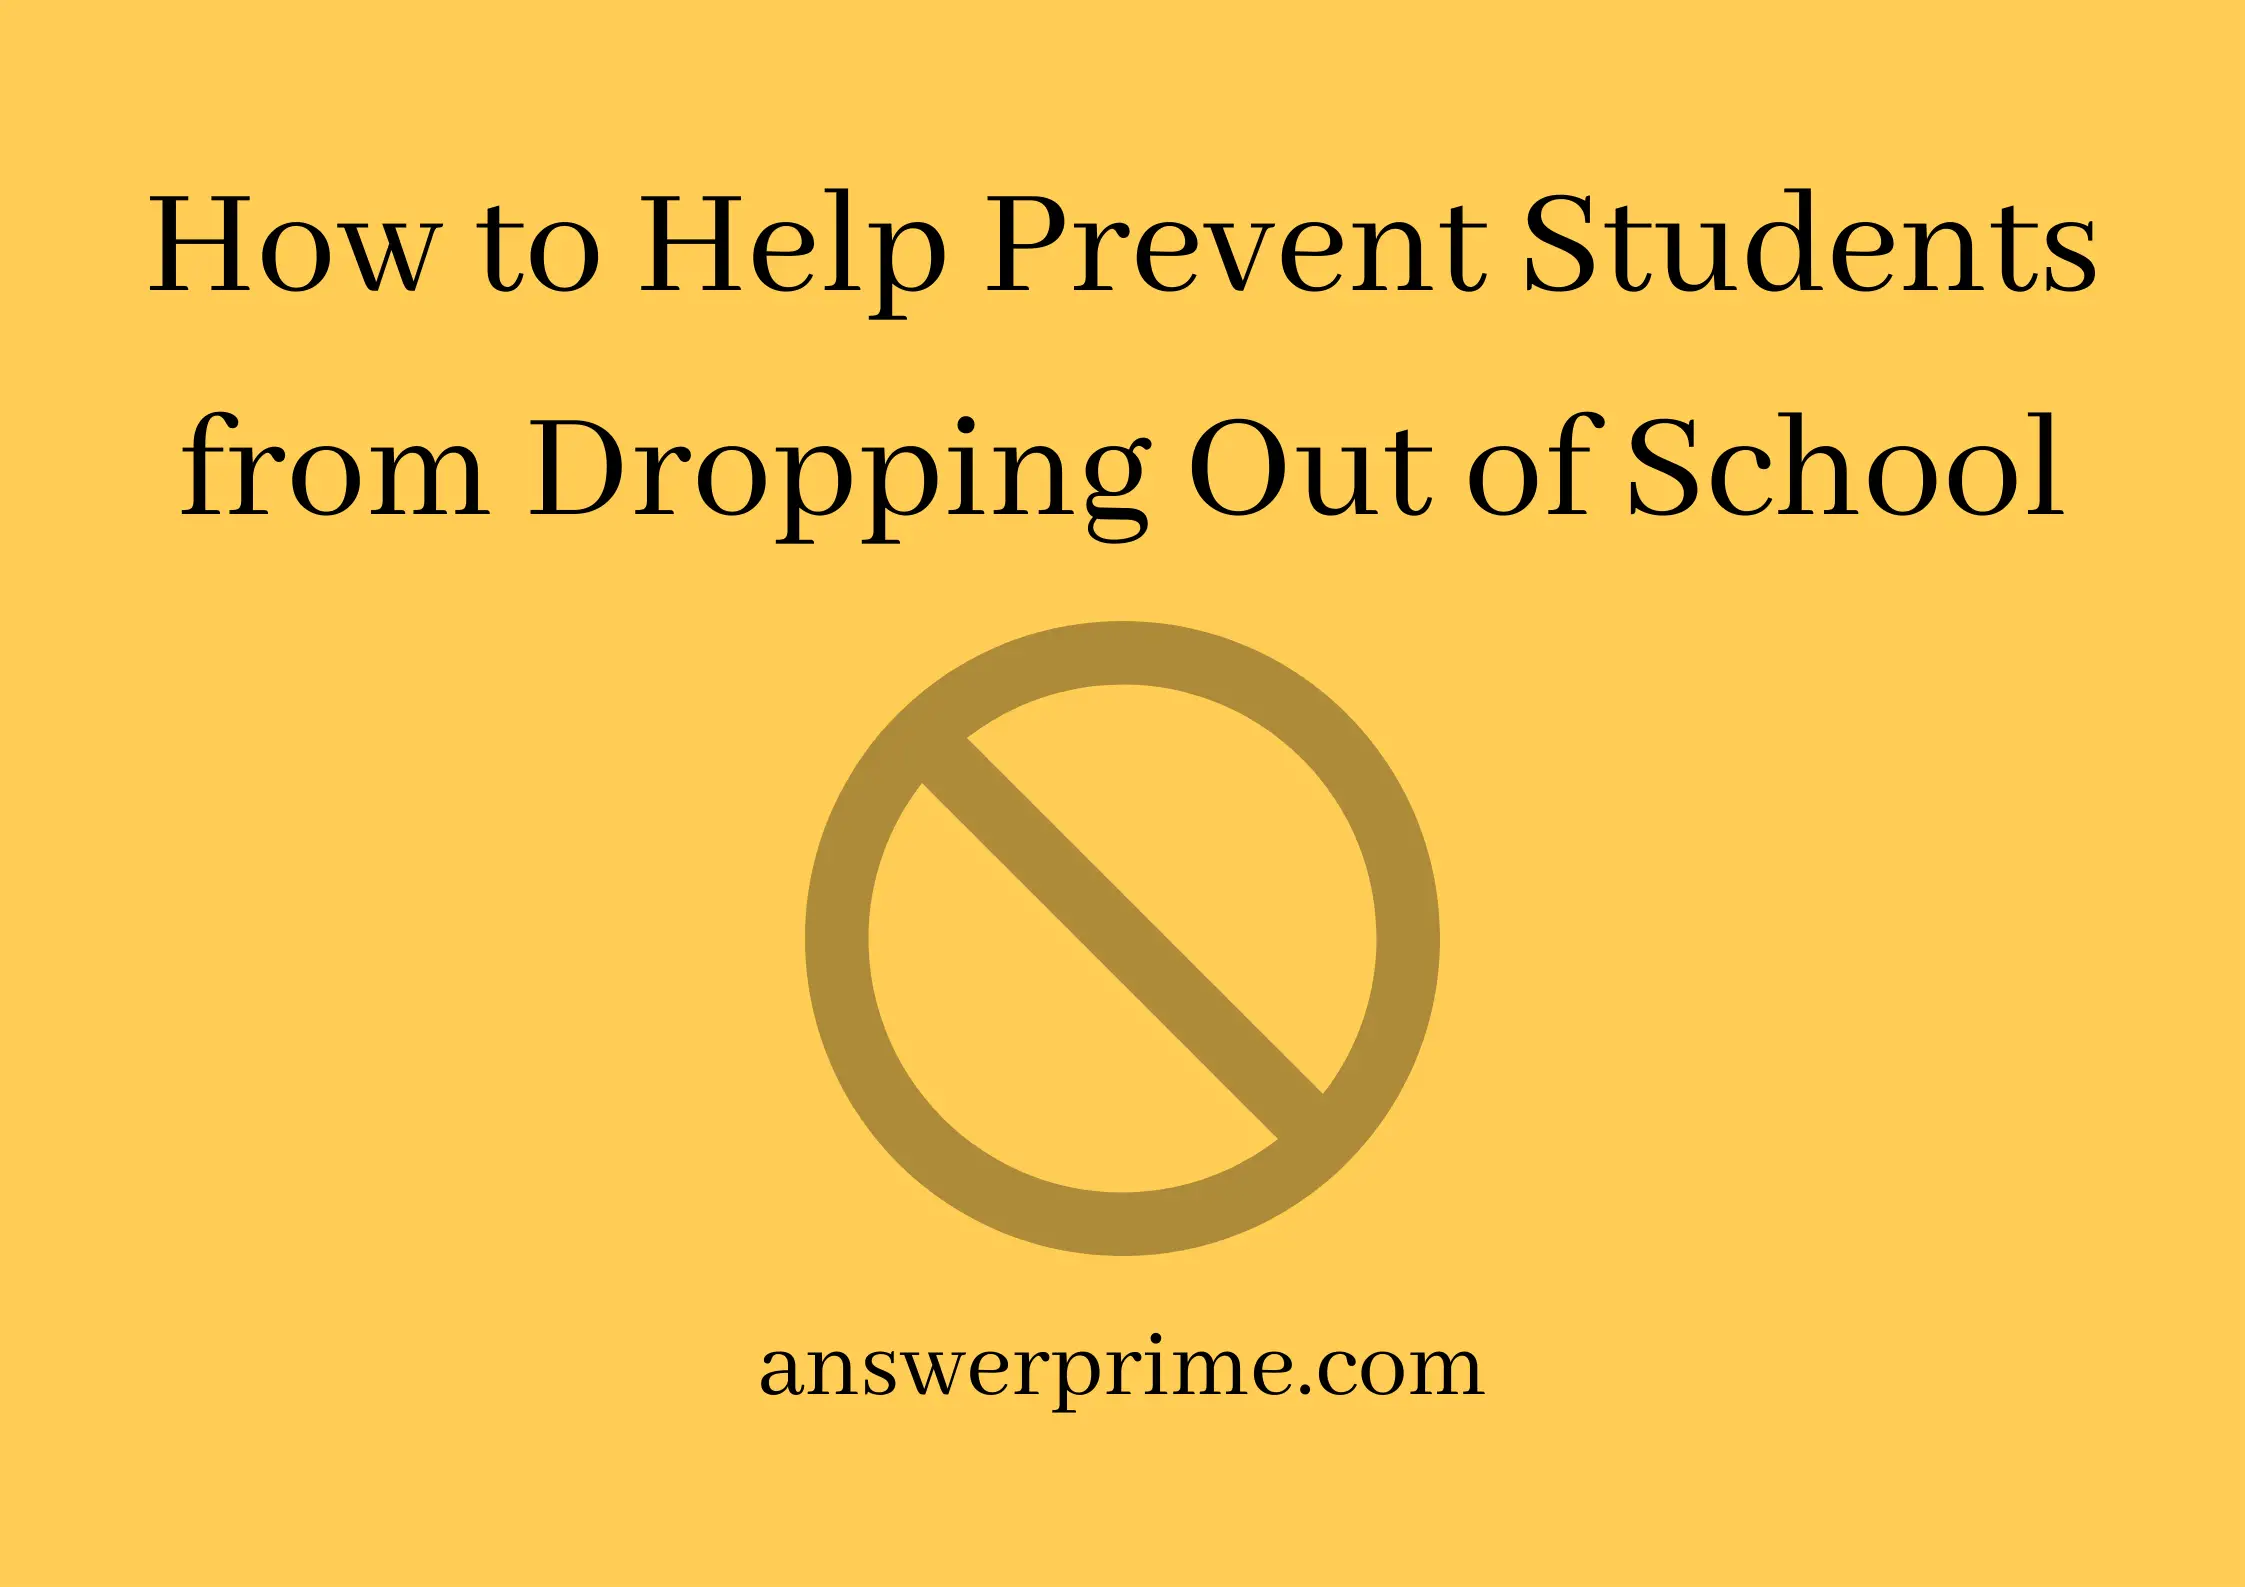 How to Help Prevent Students from Dropping Out of School